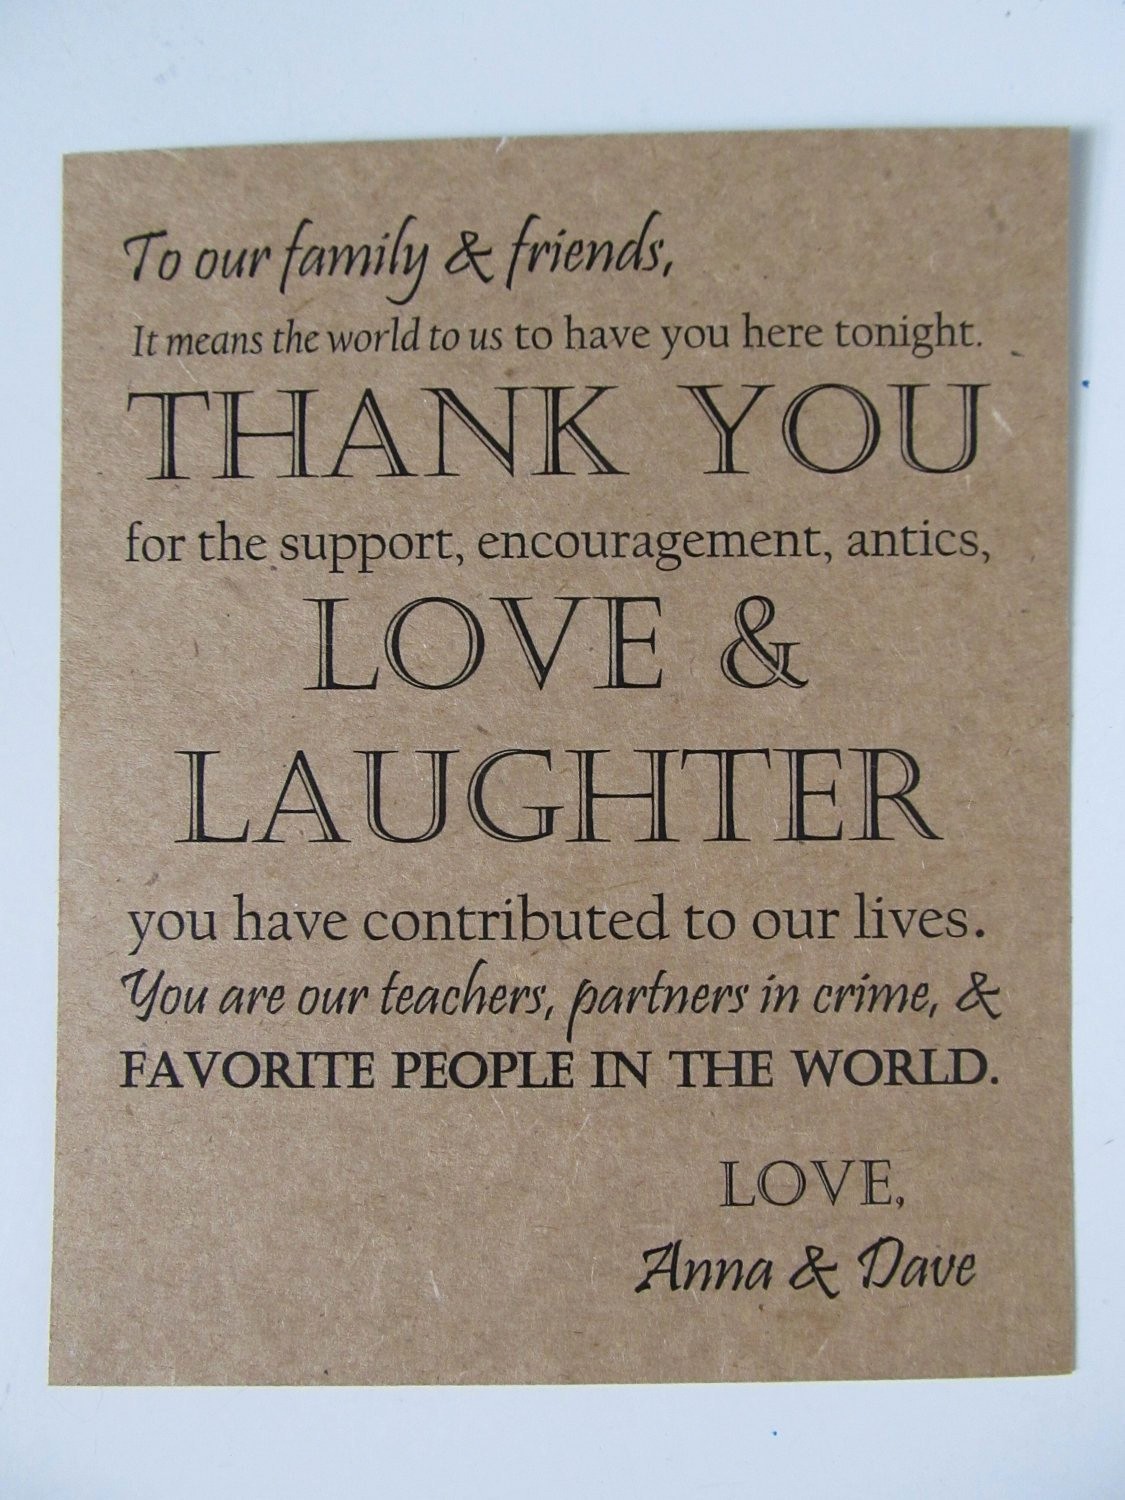 Words for Thank You Cards New Wedding Thank You Card Guests Dinner Plates or Wedding by